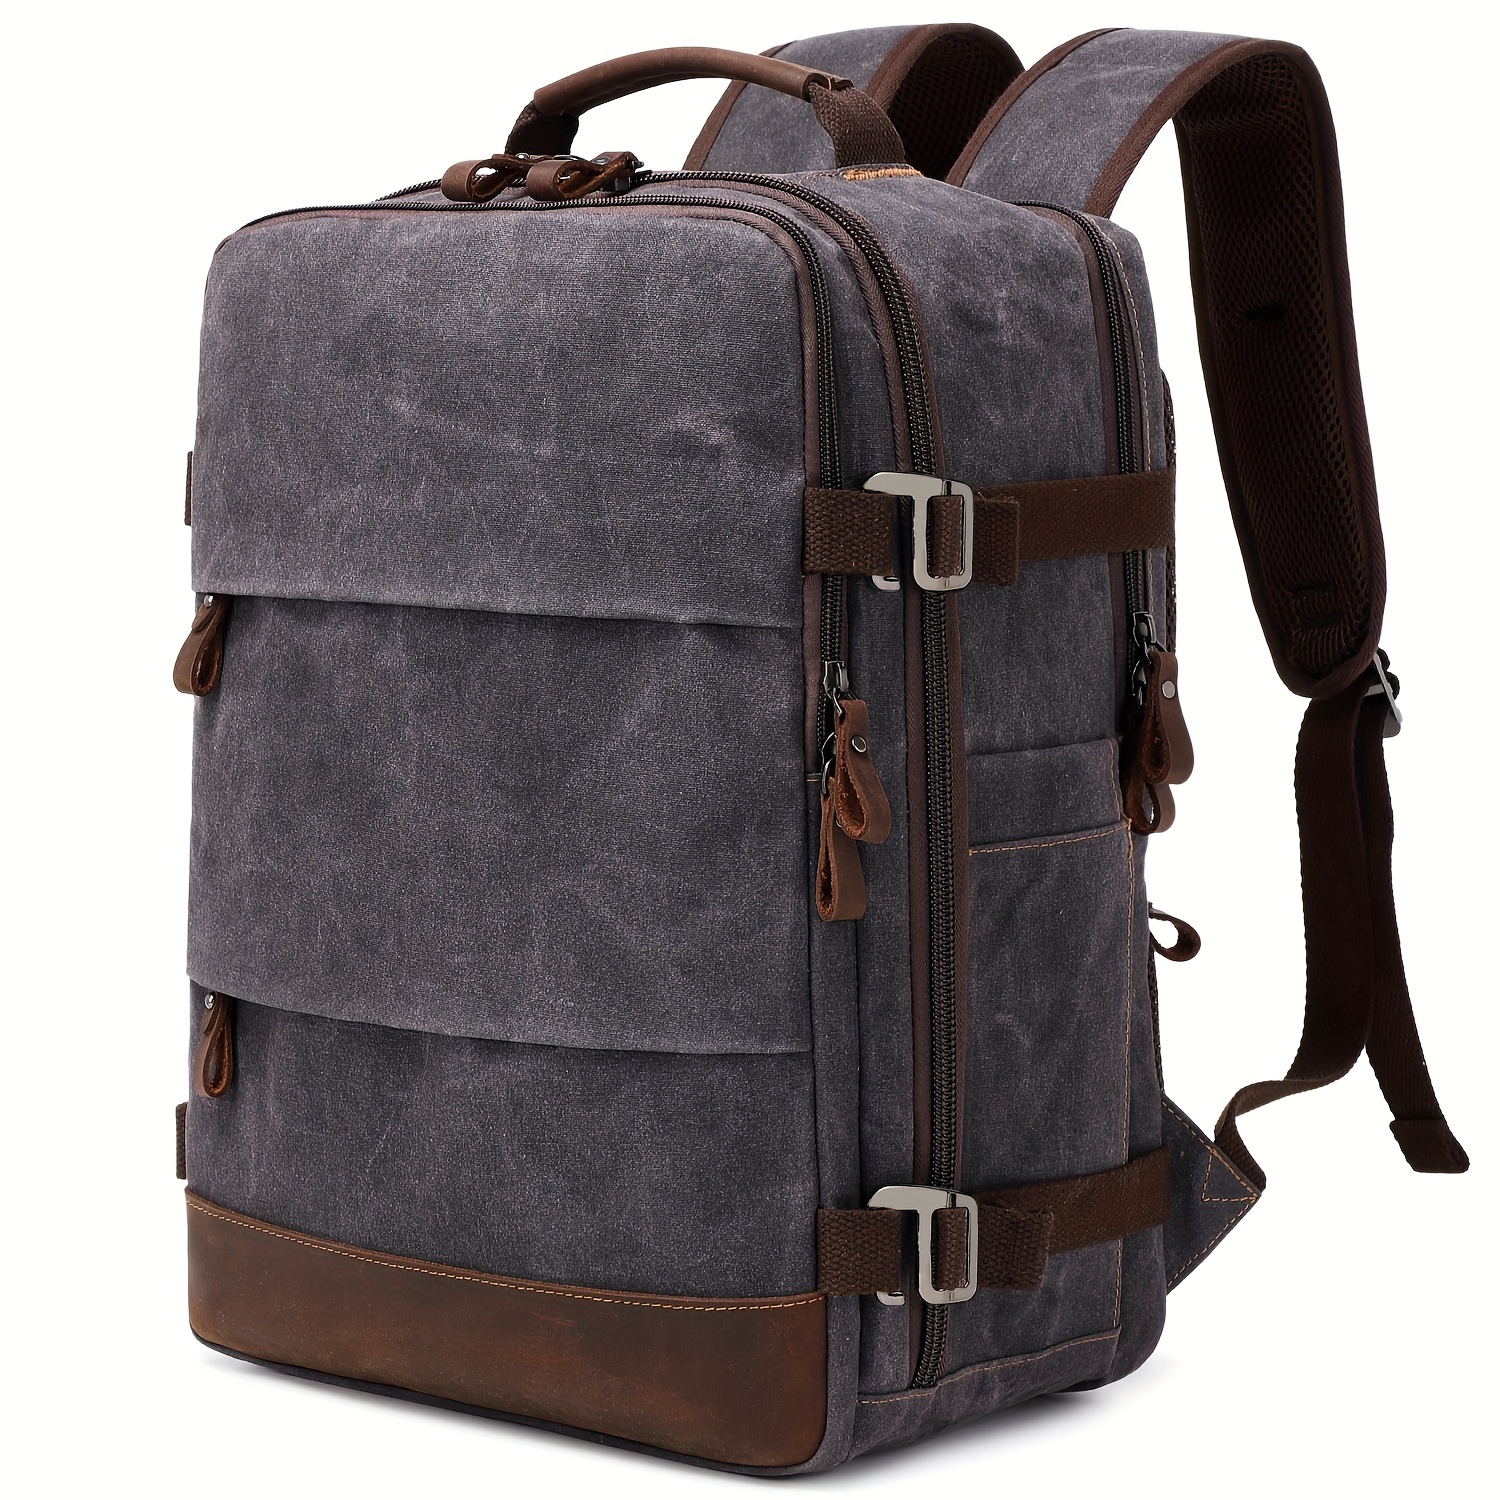 

Men's Business Backpack, Waterproof High-tech Backpack Travel Laptop Backpack Fits 17.3-inch Laptop Oil-waxed Canvas Crazy Horse Cowhide Leather